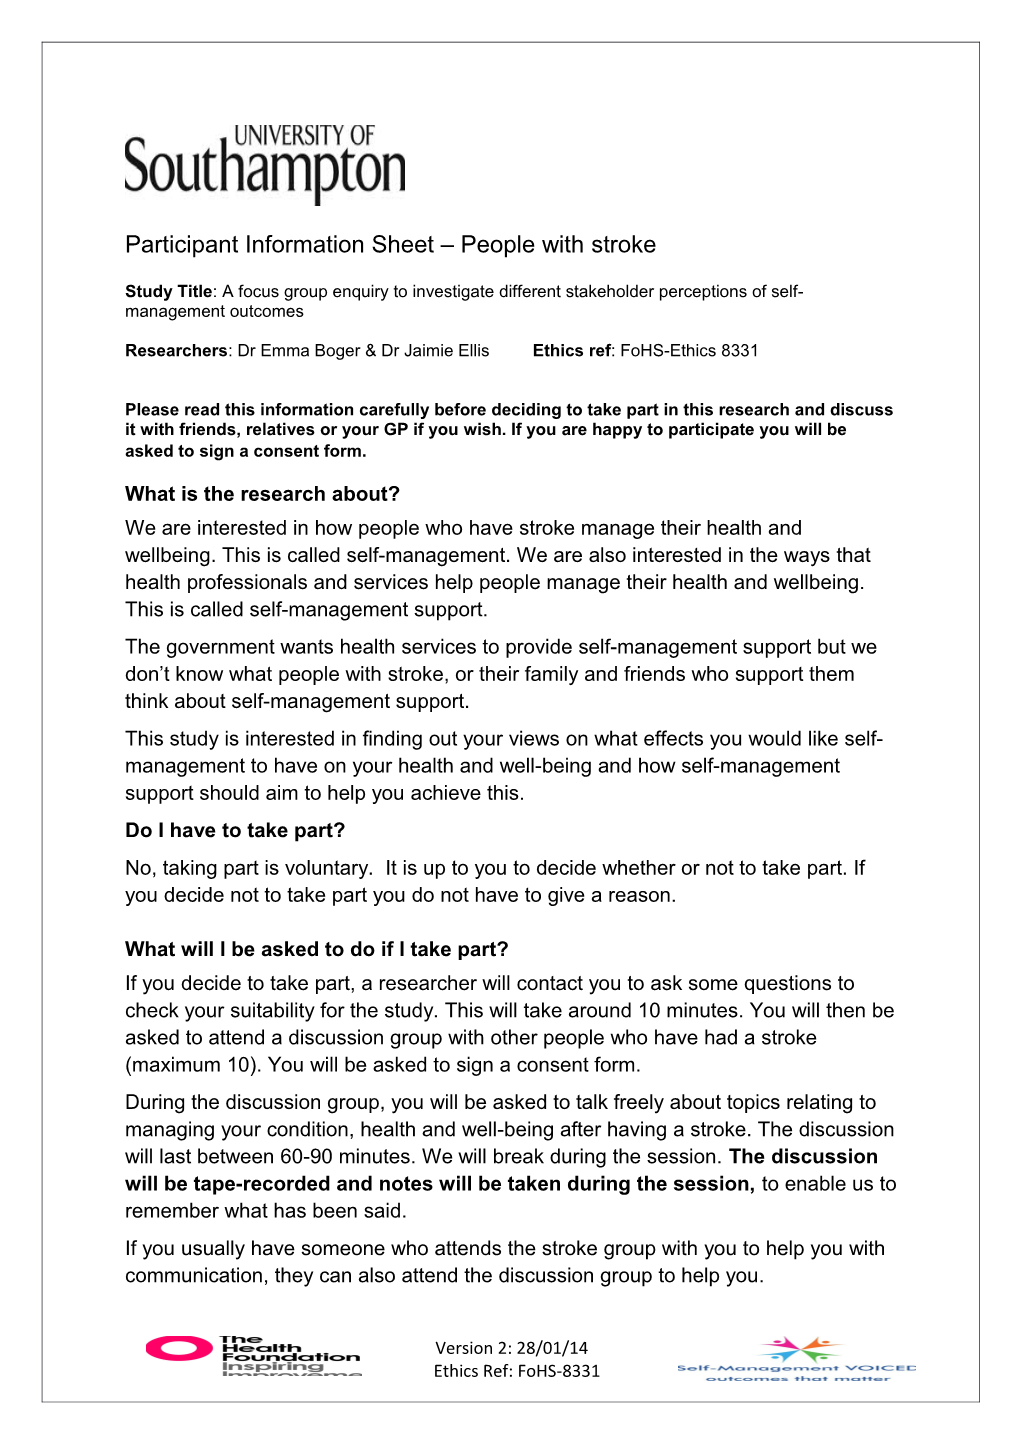 Participant Information Sheet People with Stroke